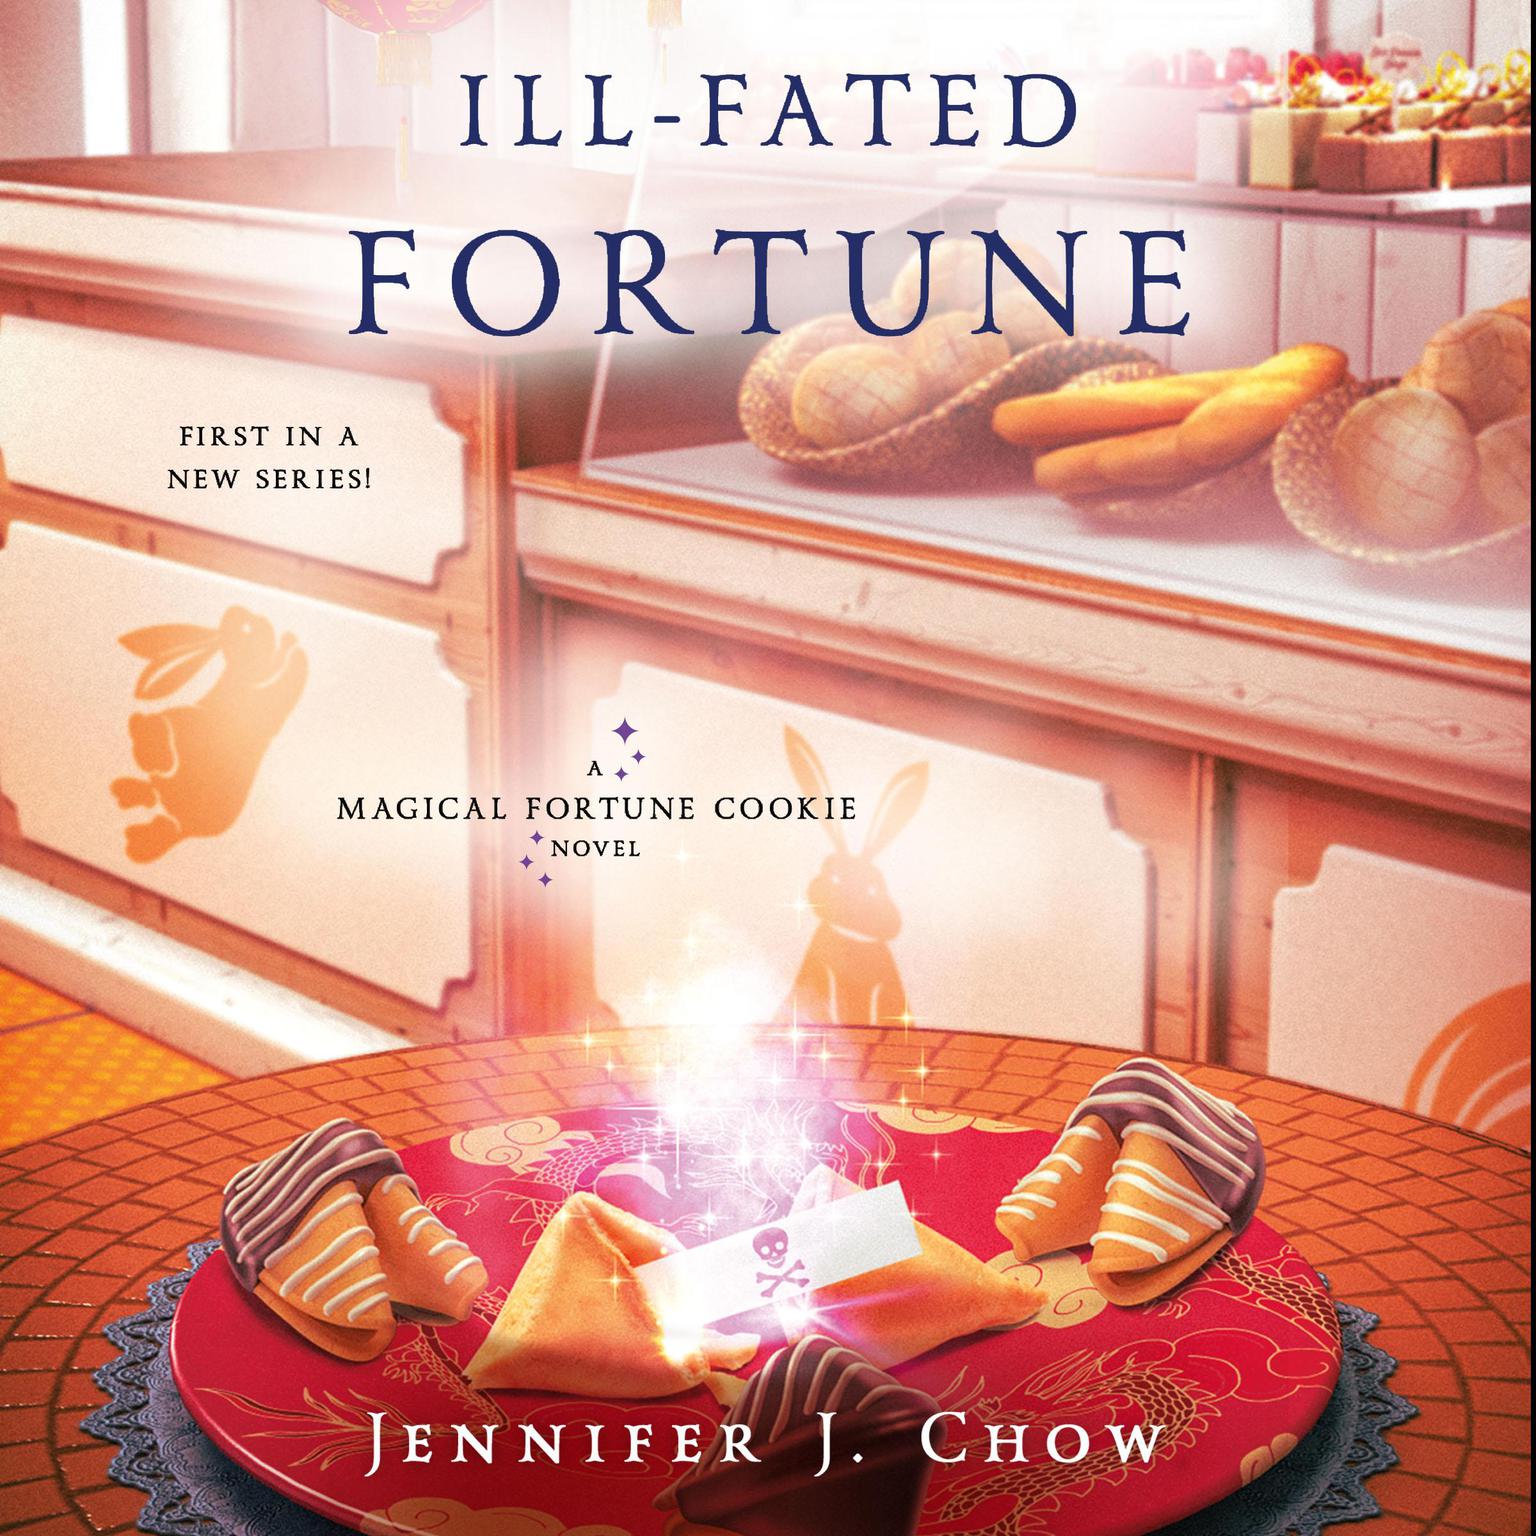 Ill-Fated Fortune Audiobook, by Jennifer J. Chow